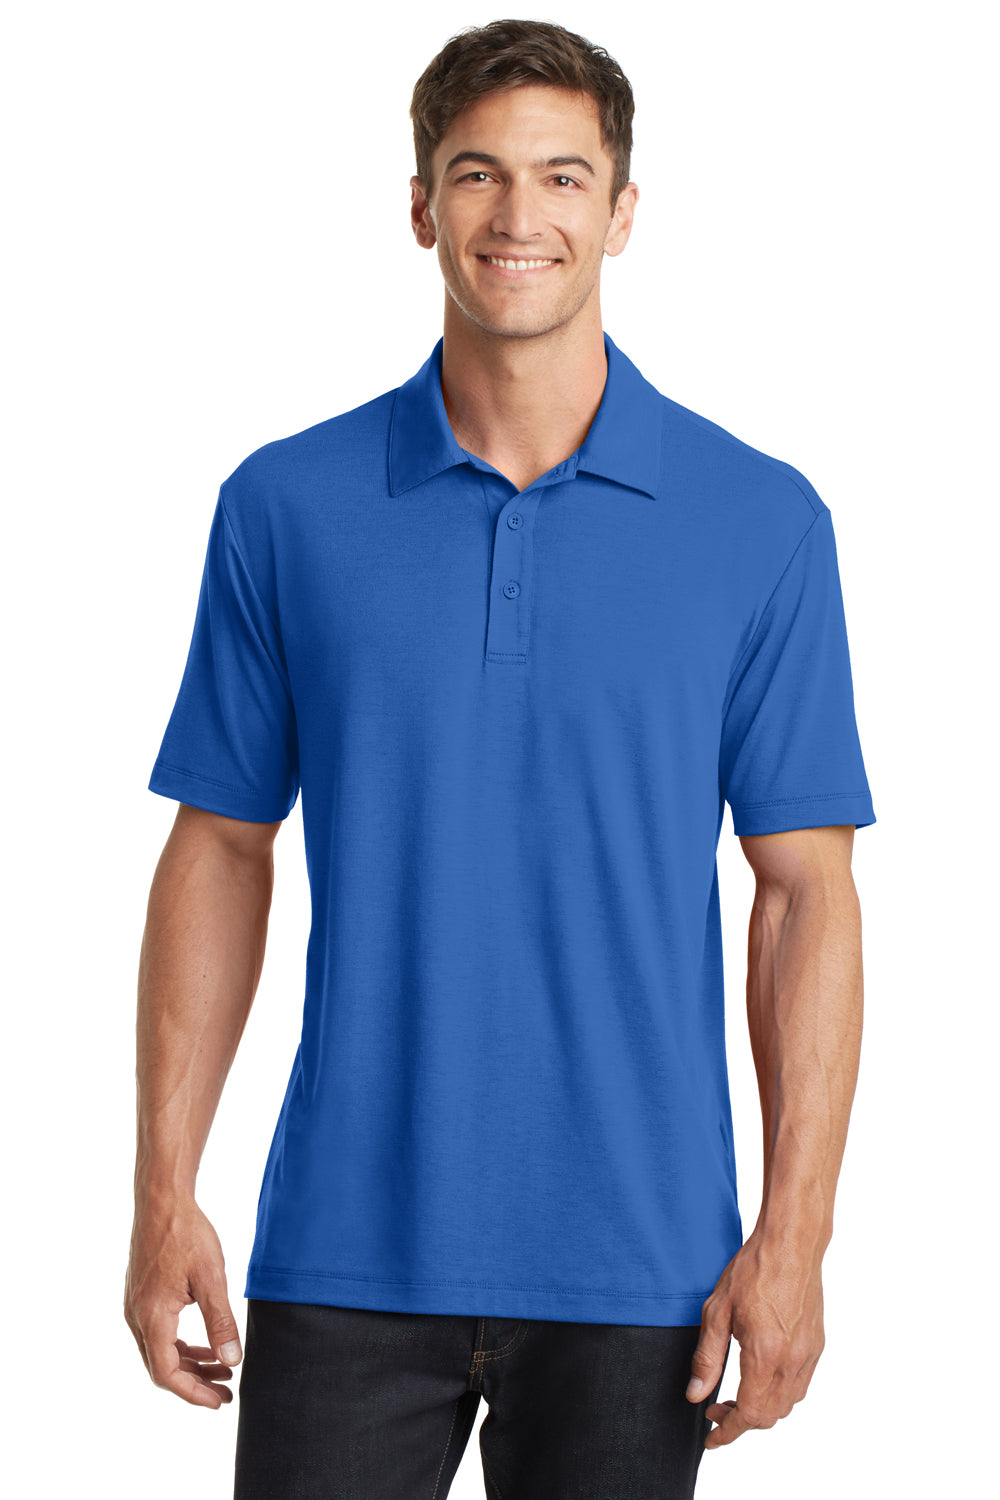 Port Authority K568 Mens Cotton Touch Performance Moisture Wicking Short Sleeve Polo Shirt Strong Blue Front